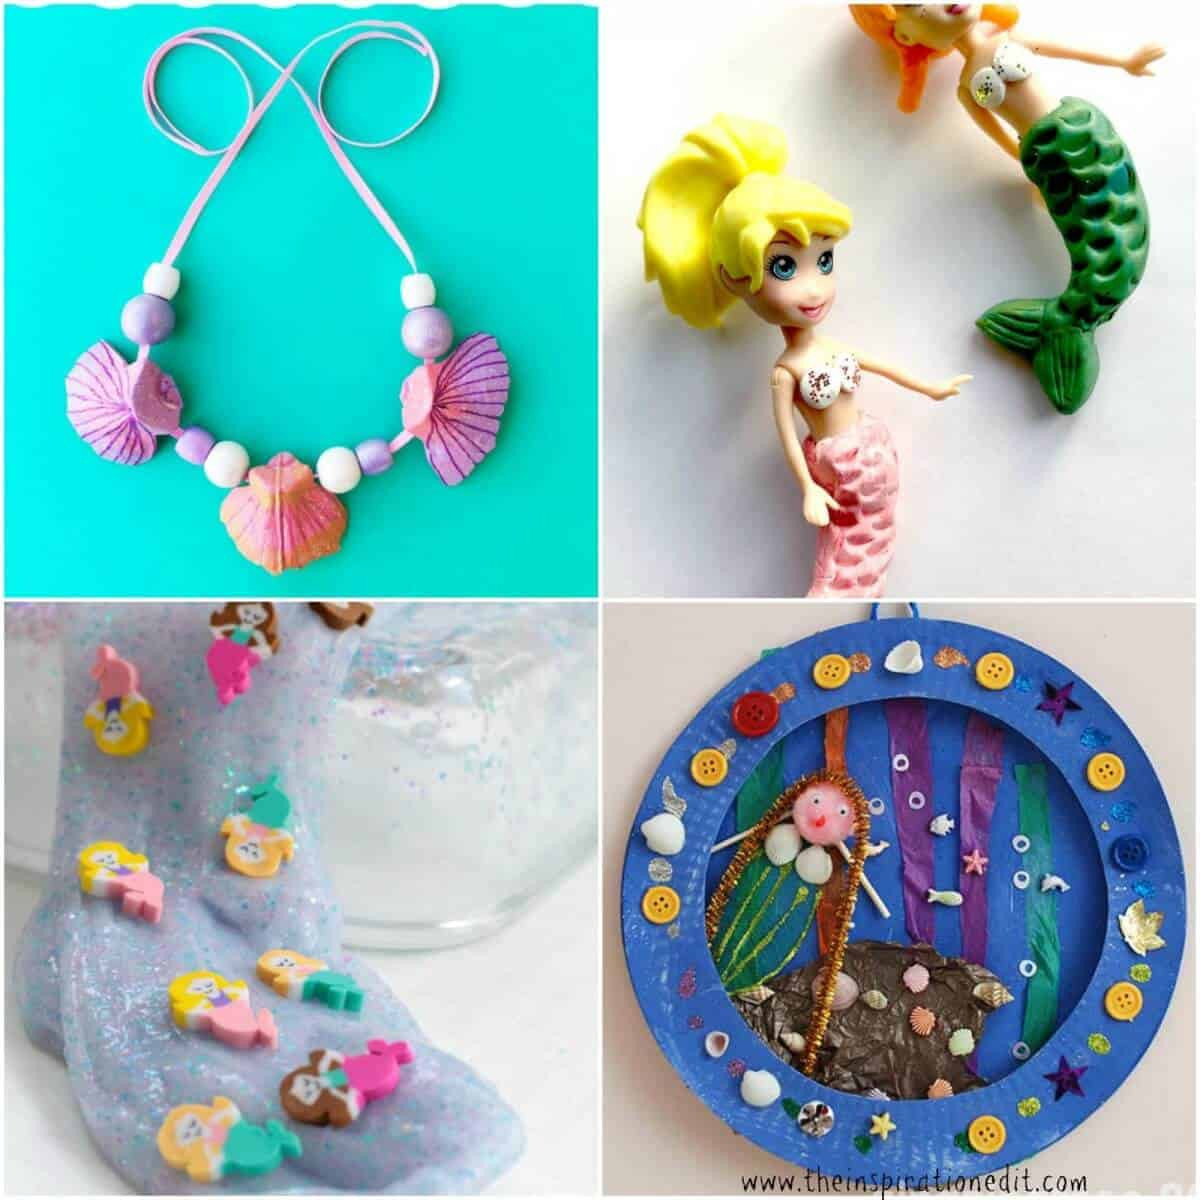 Mermaid Crafts For Kids
 17 Amazing Mermaid Crafts For Kids · The Inspiration Edit